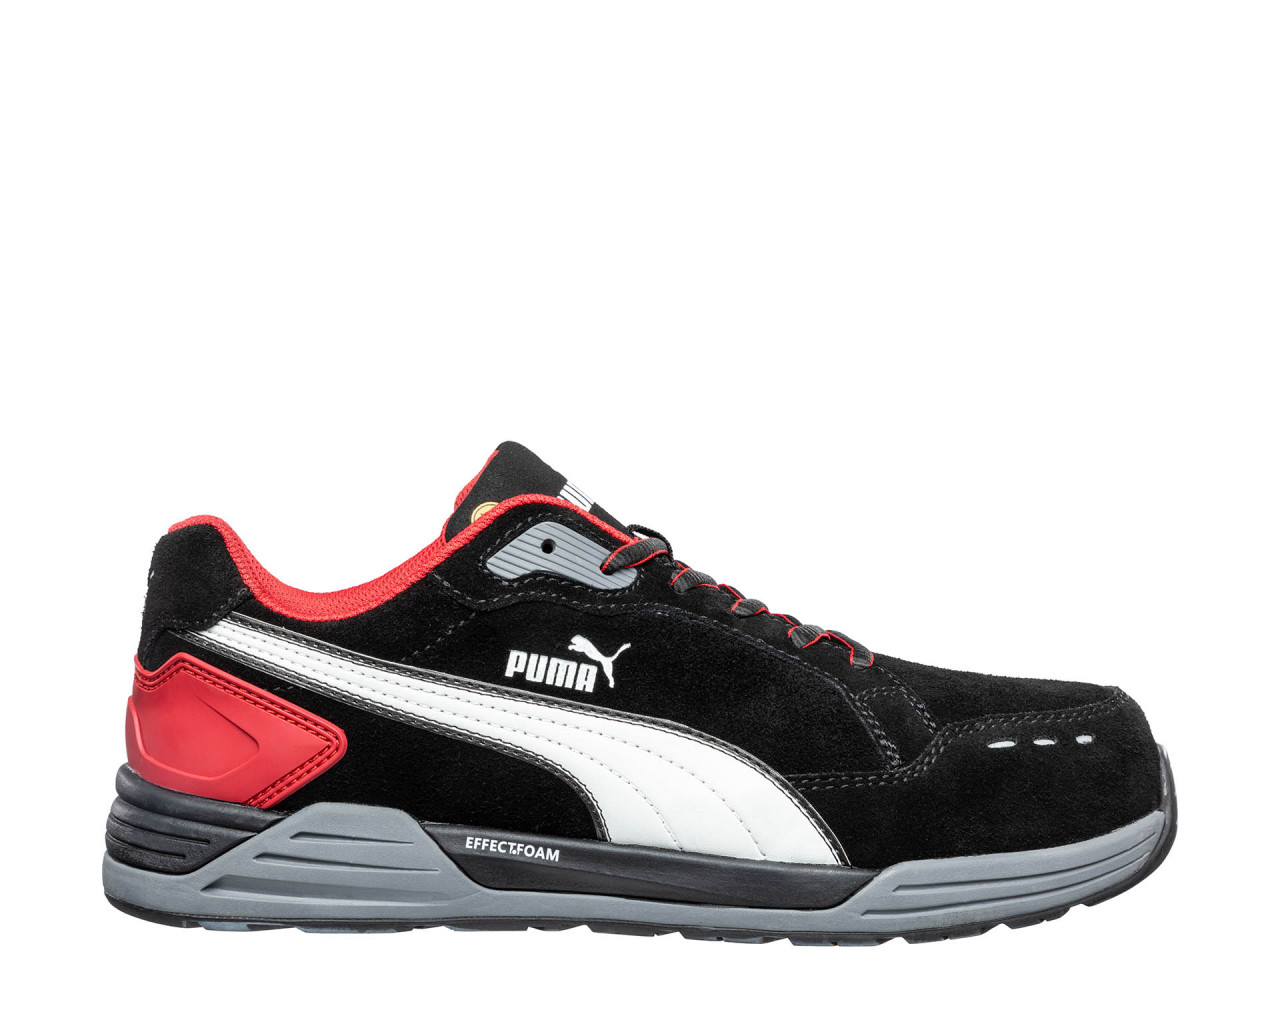 PUMA SAFETY safety shoes AIRTWIST Safety LOW BLK/RED English | HRO S3 Puma ESD SRC